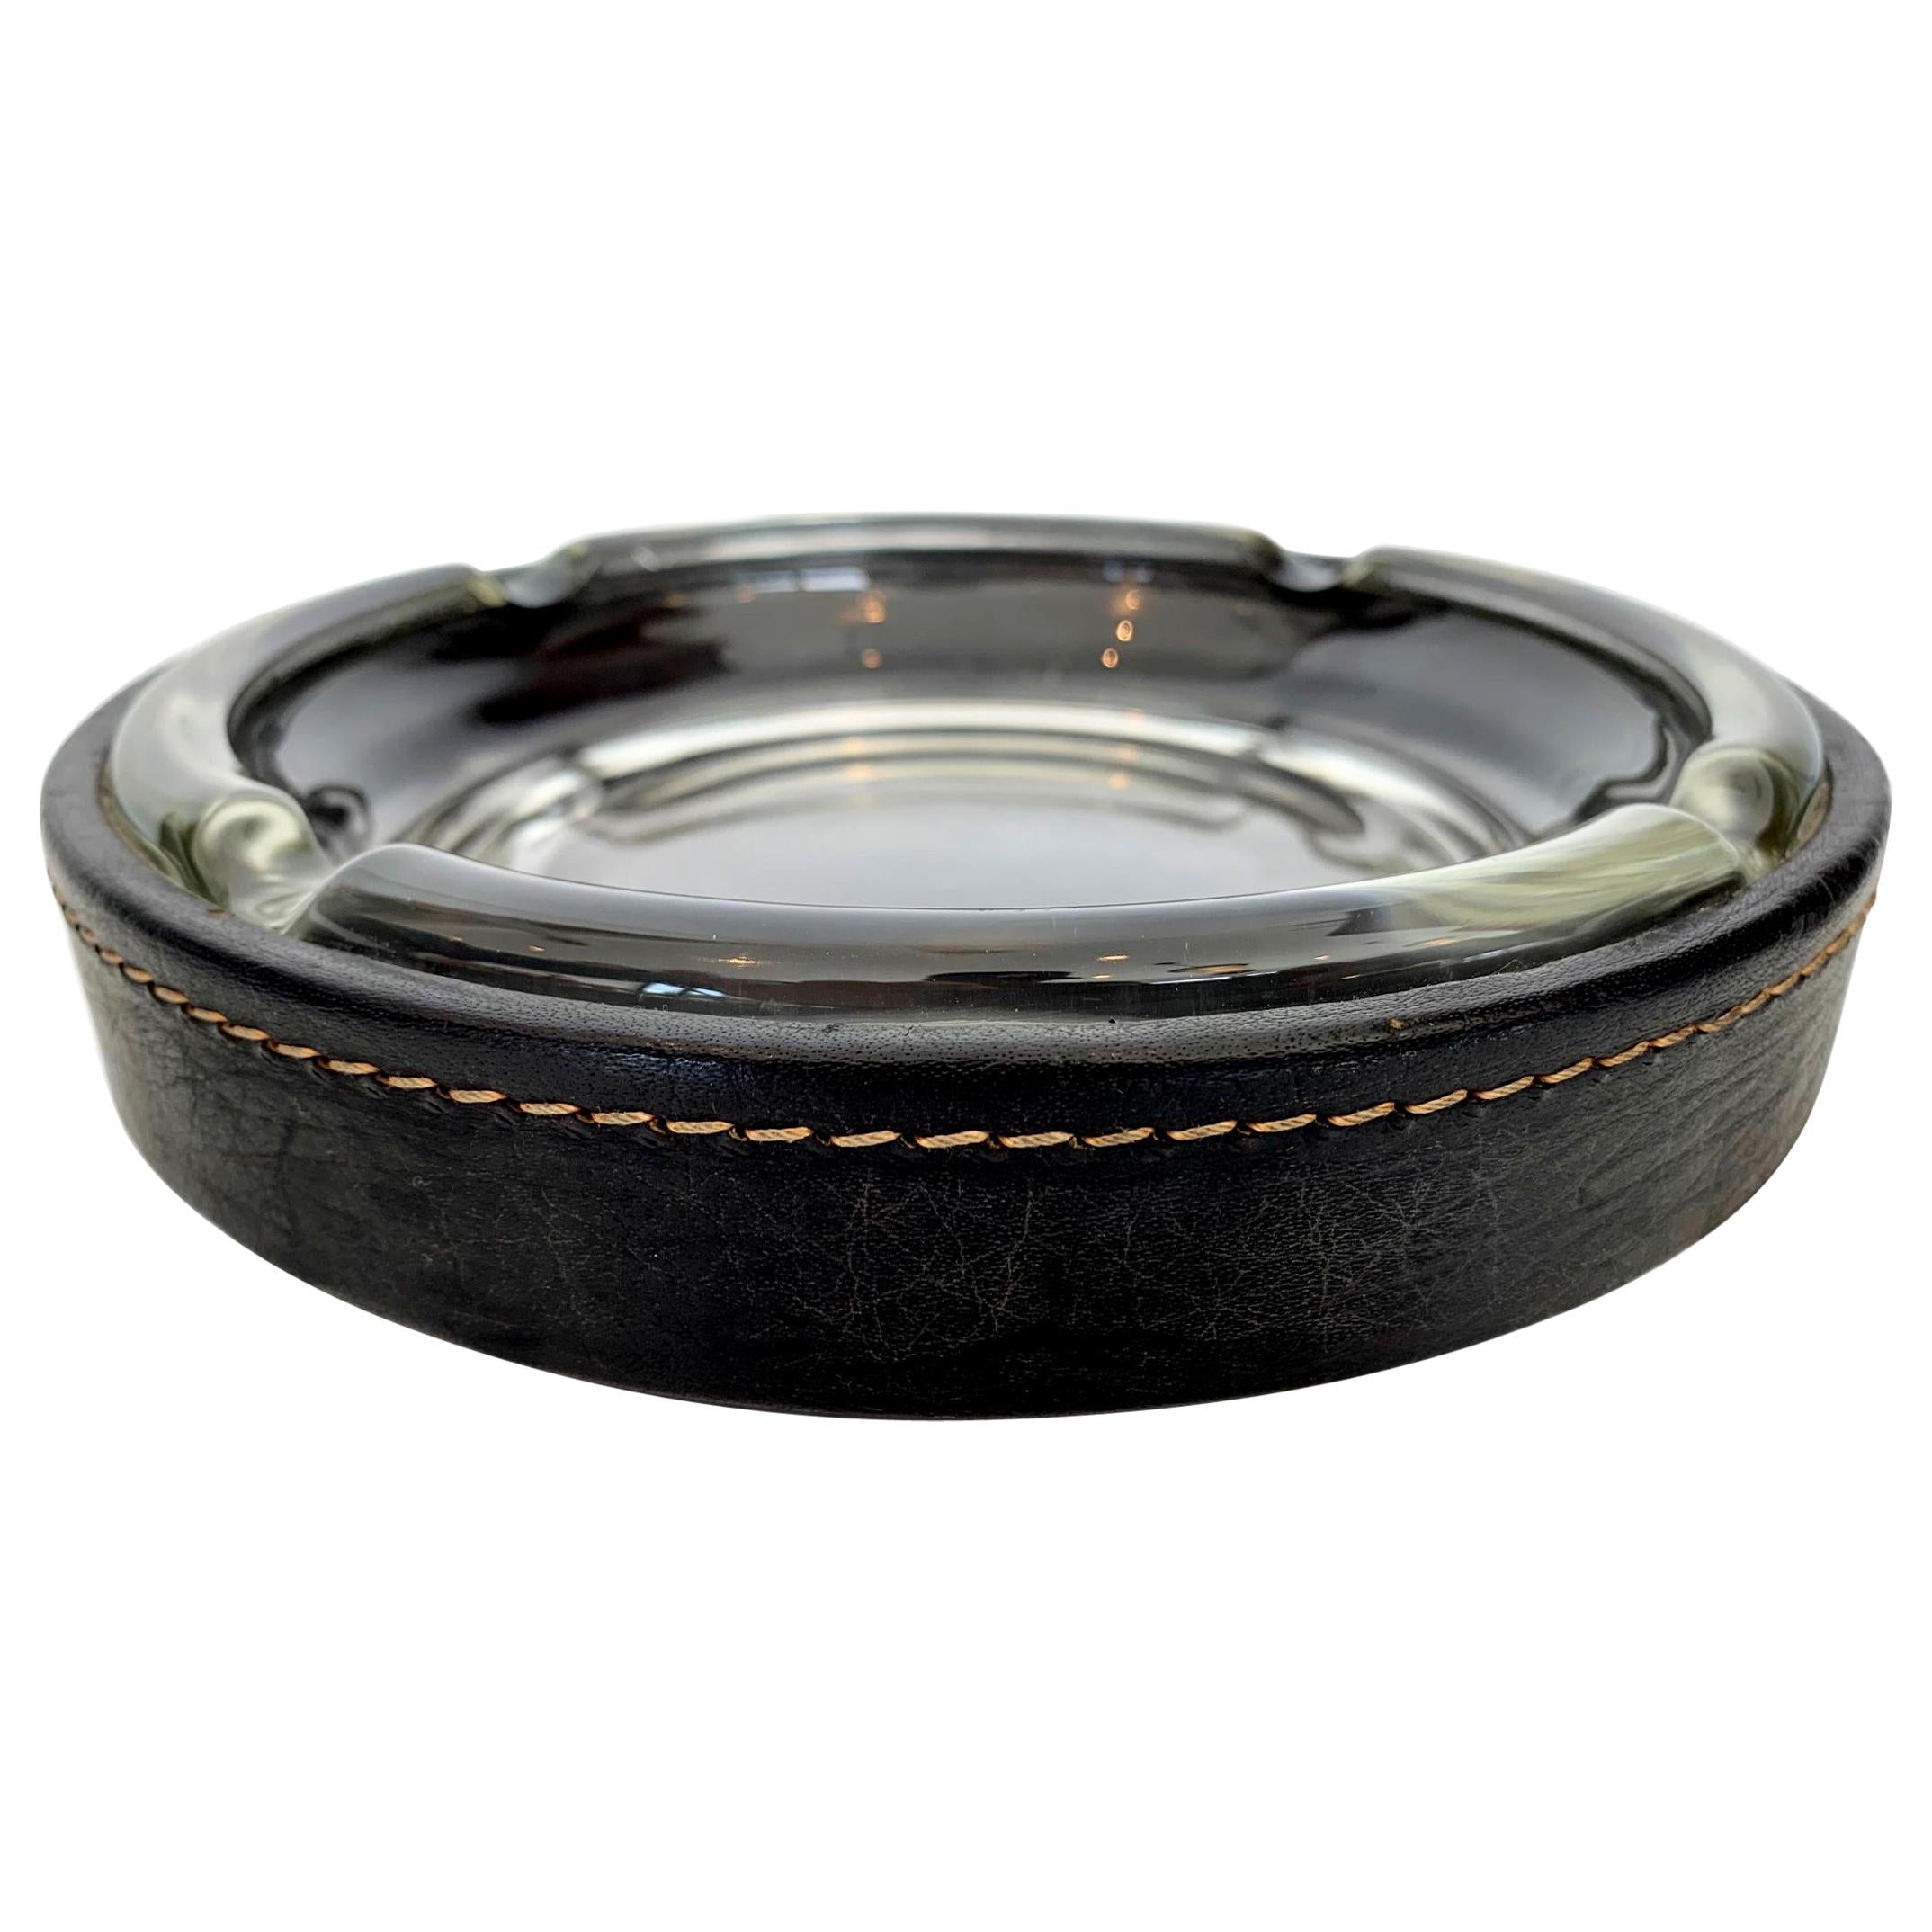 Adnet Style Leather and Glass Ashtray / Catchall